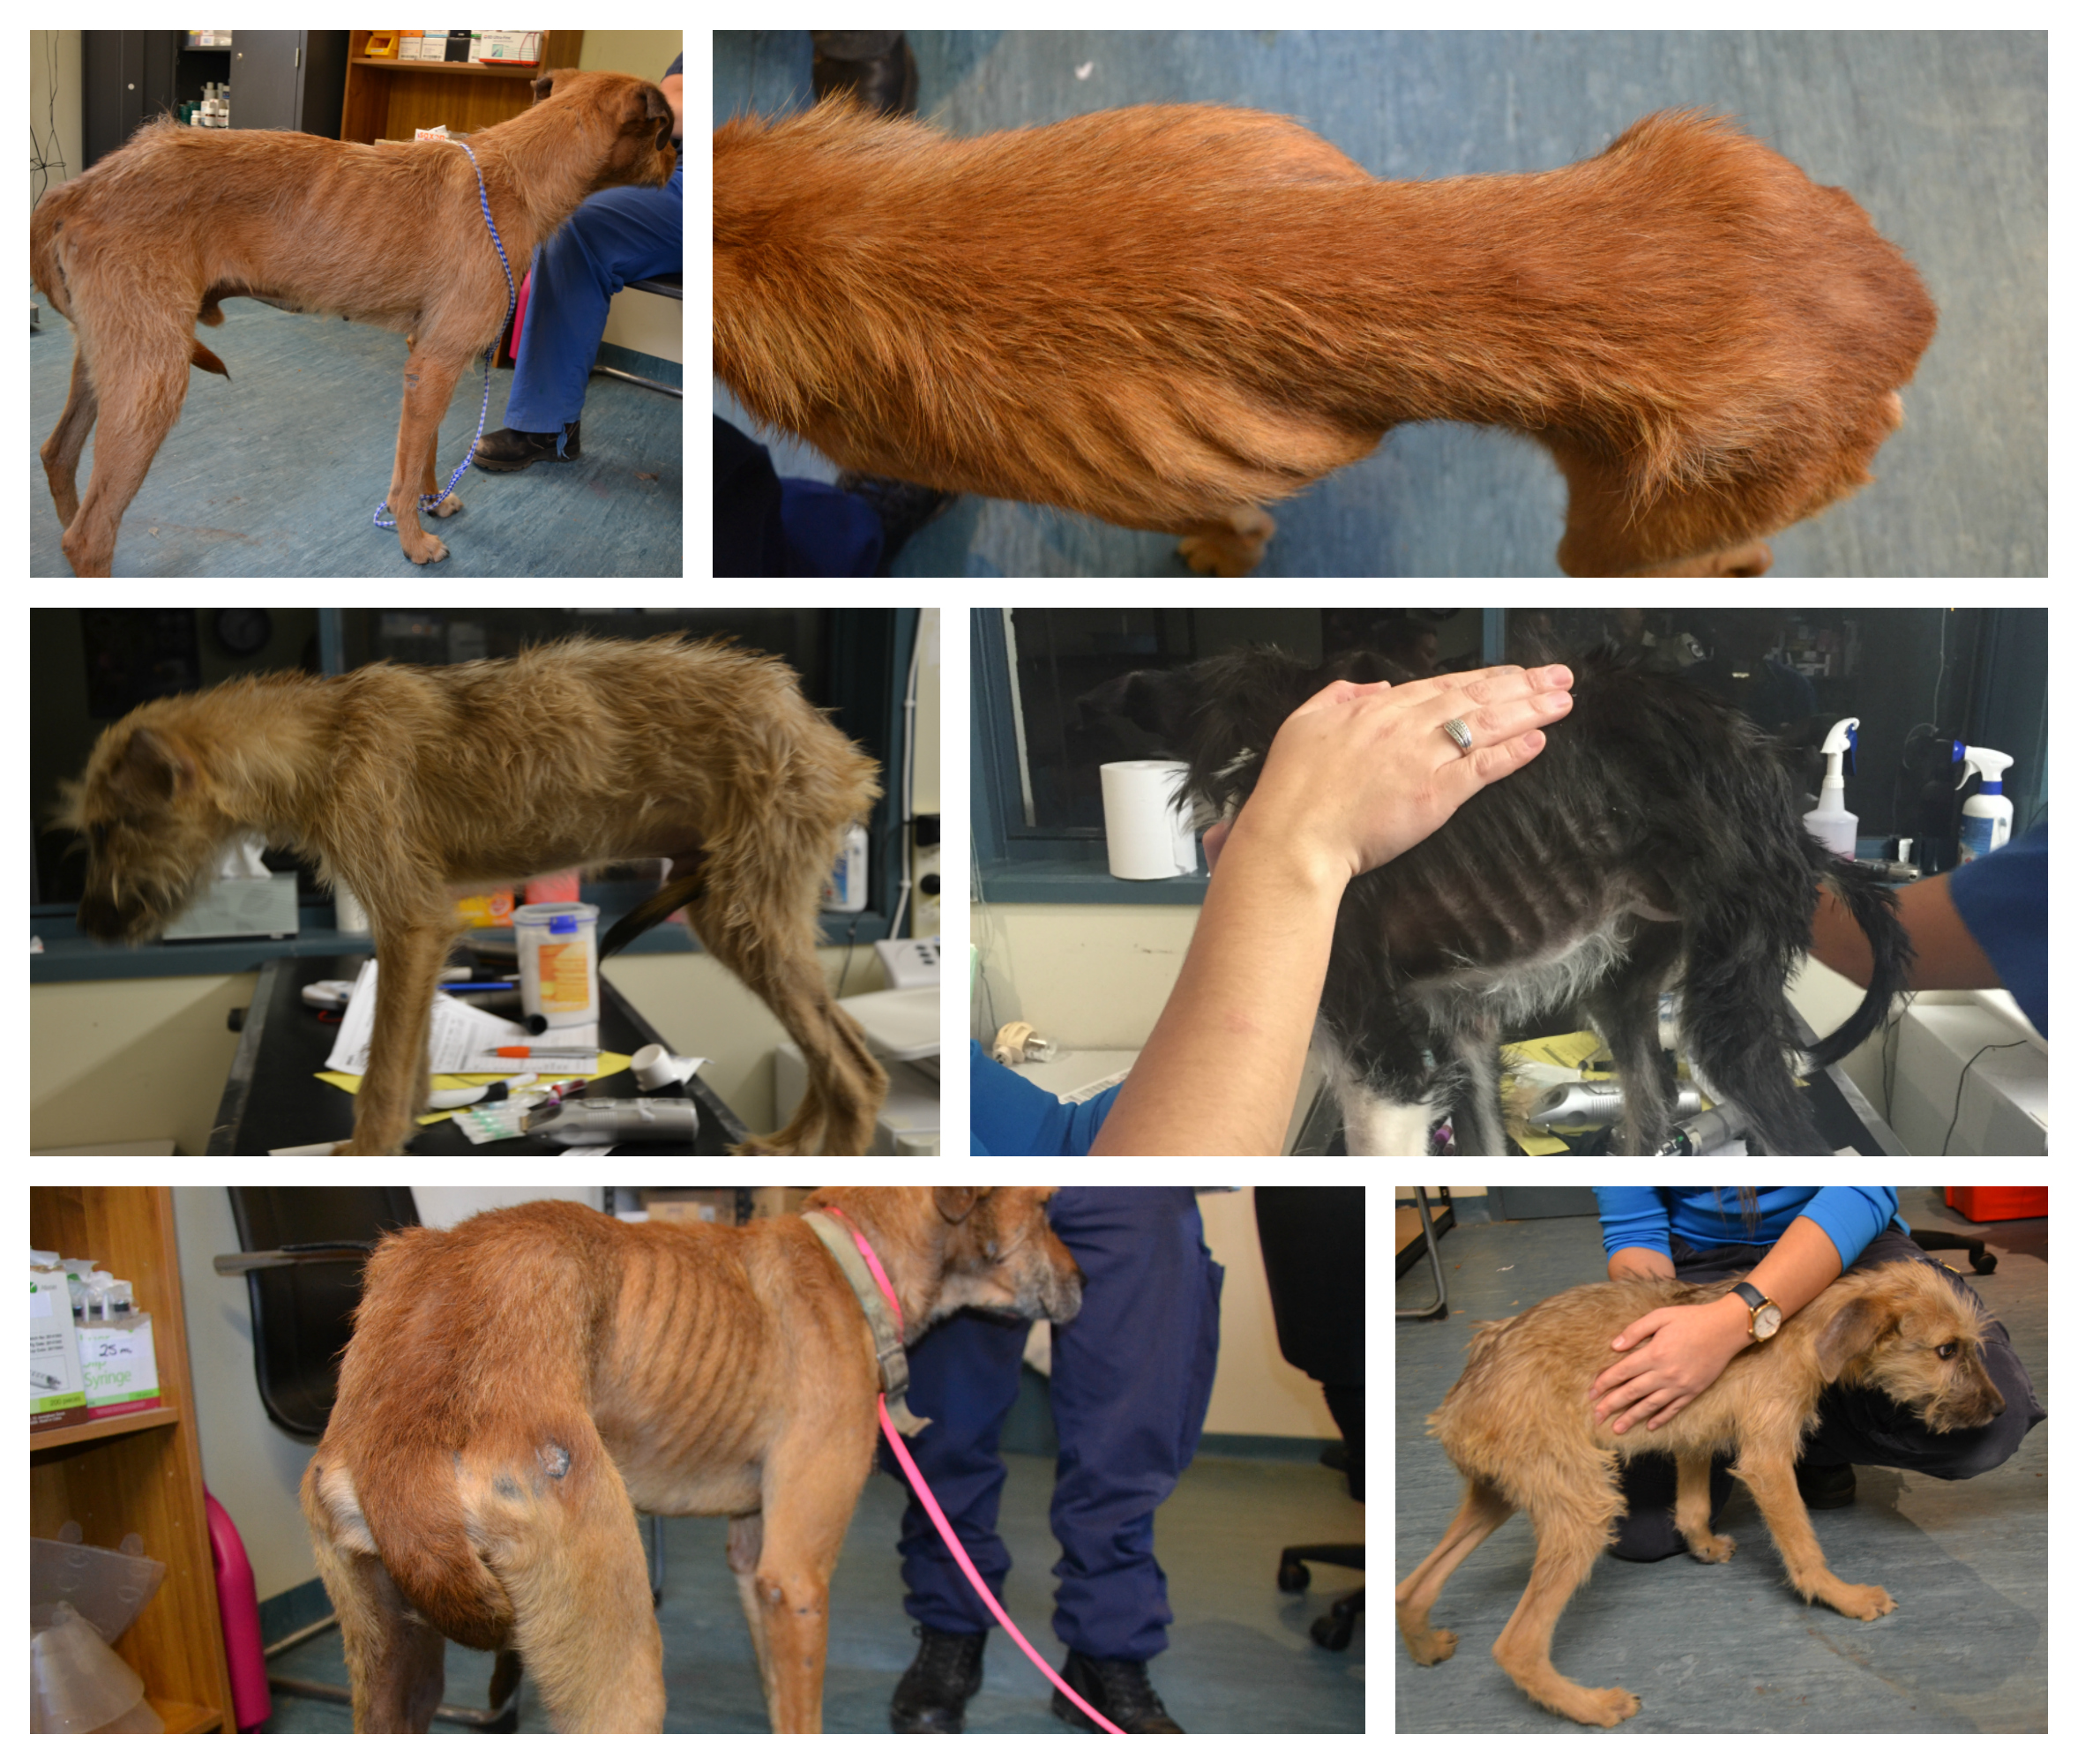 All dogs seized were significantly malnourished